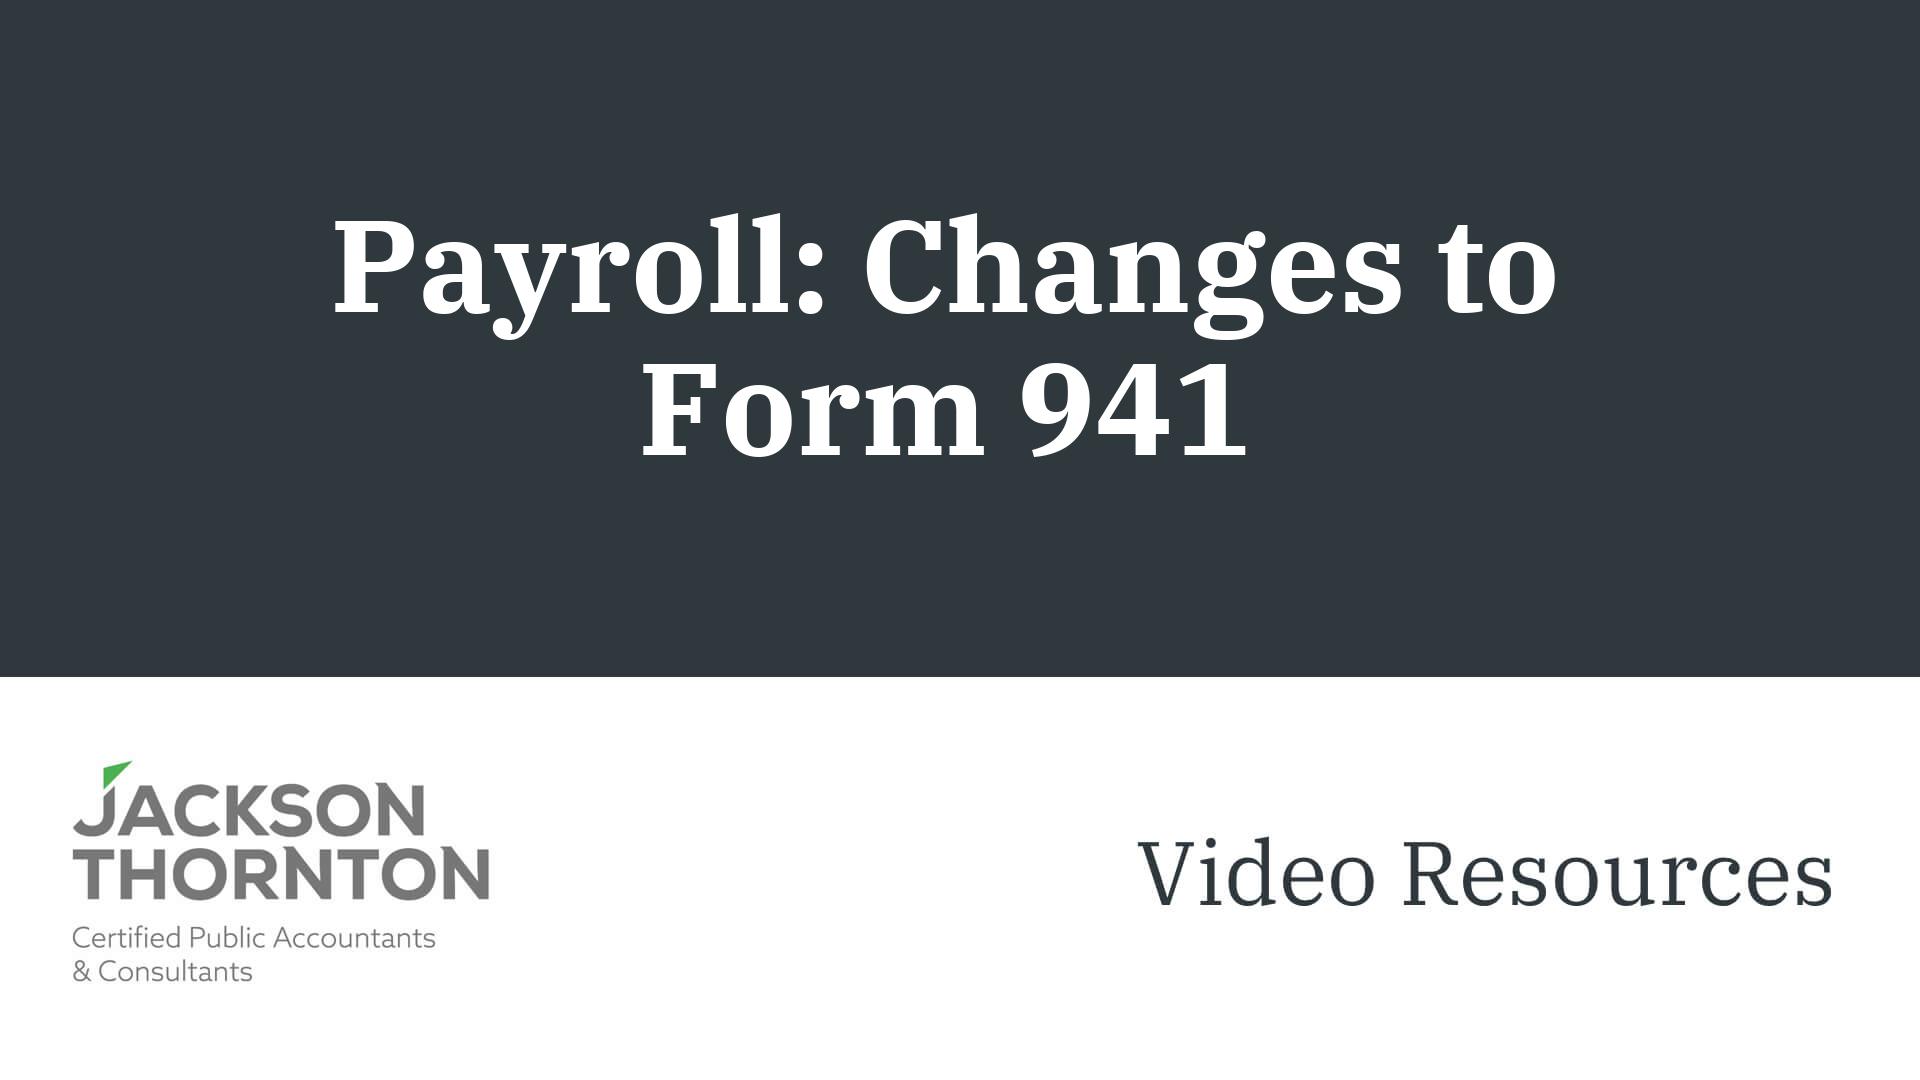 Payroll: Changes to Form 941